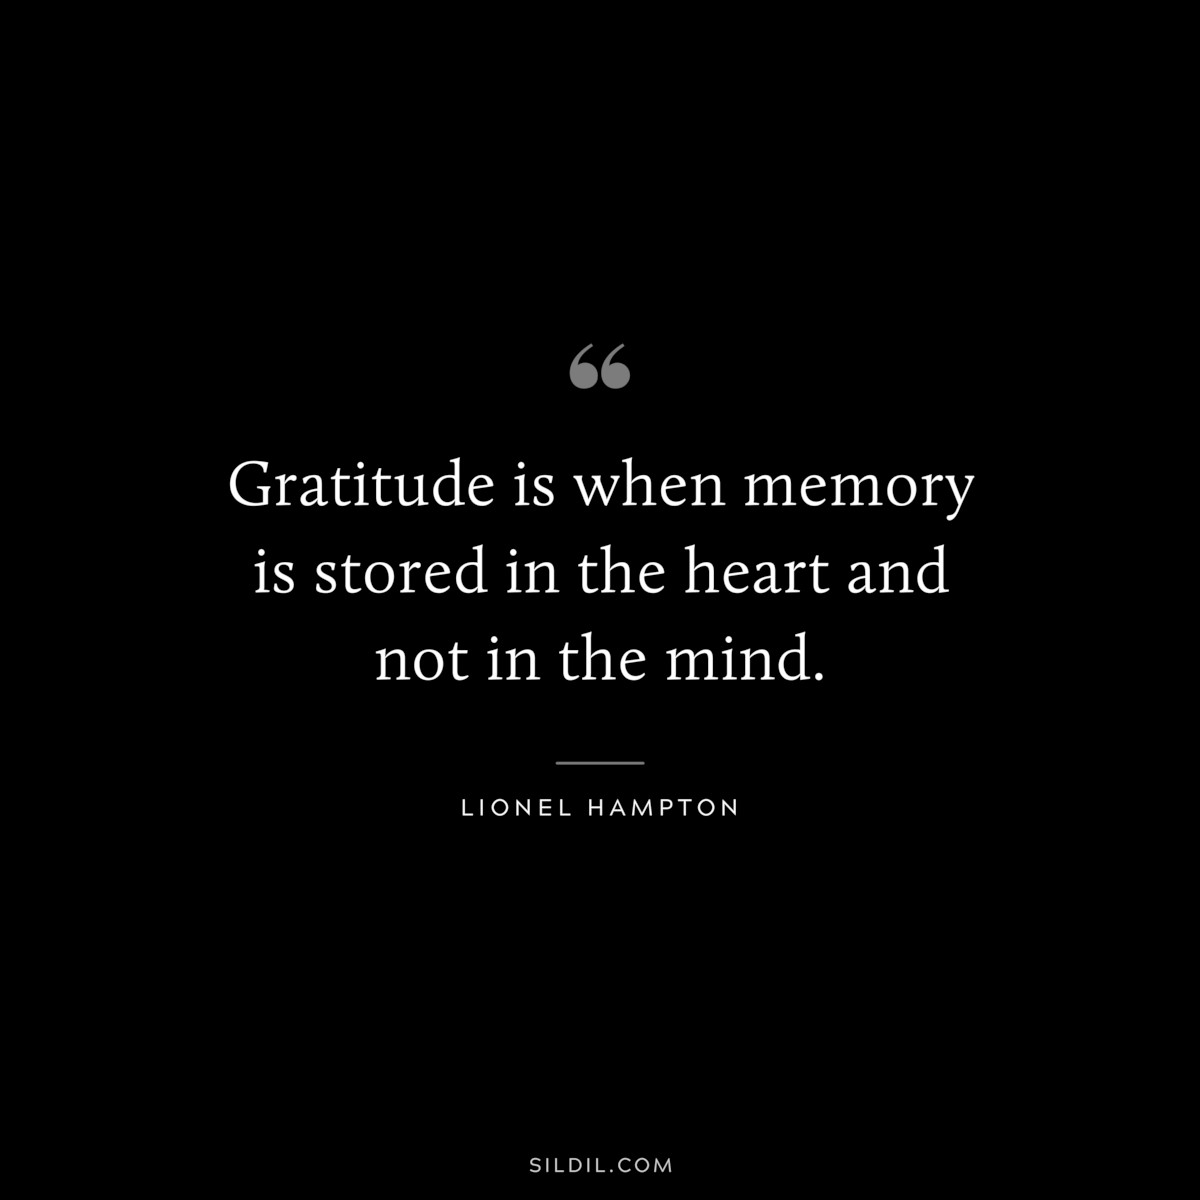 Gratitude is when memory is stored in the heart and not in the mind. ― Lionel Hampton